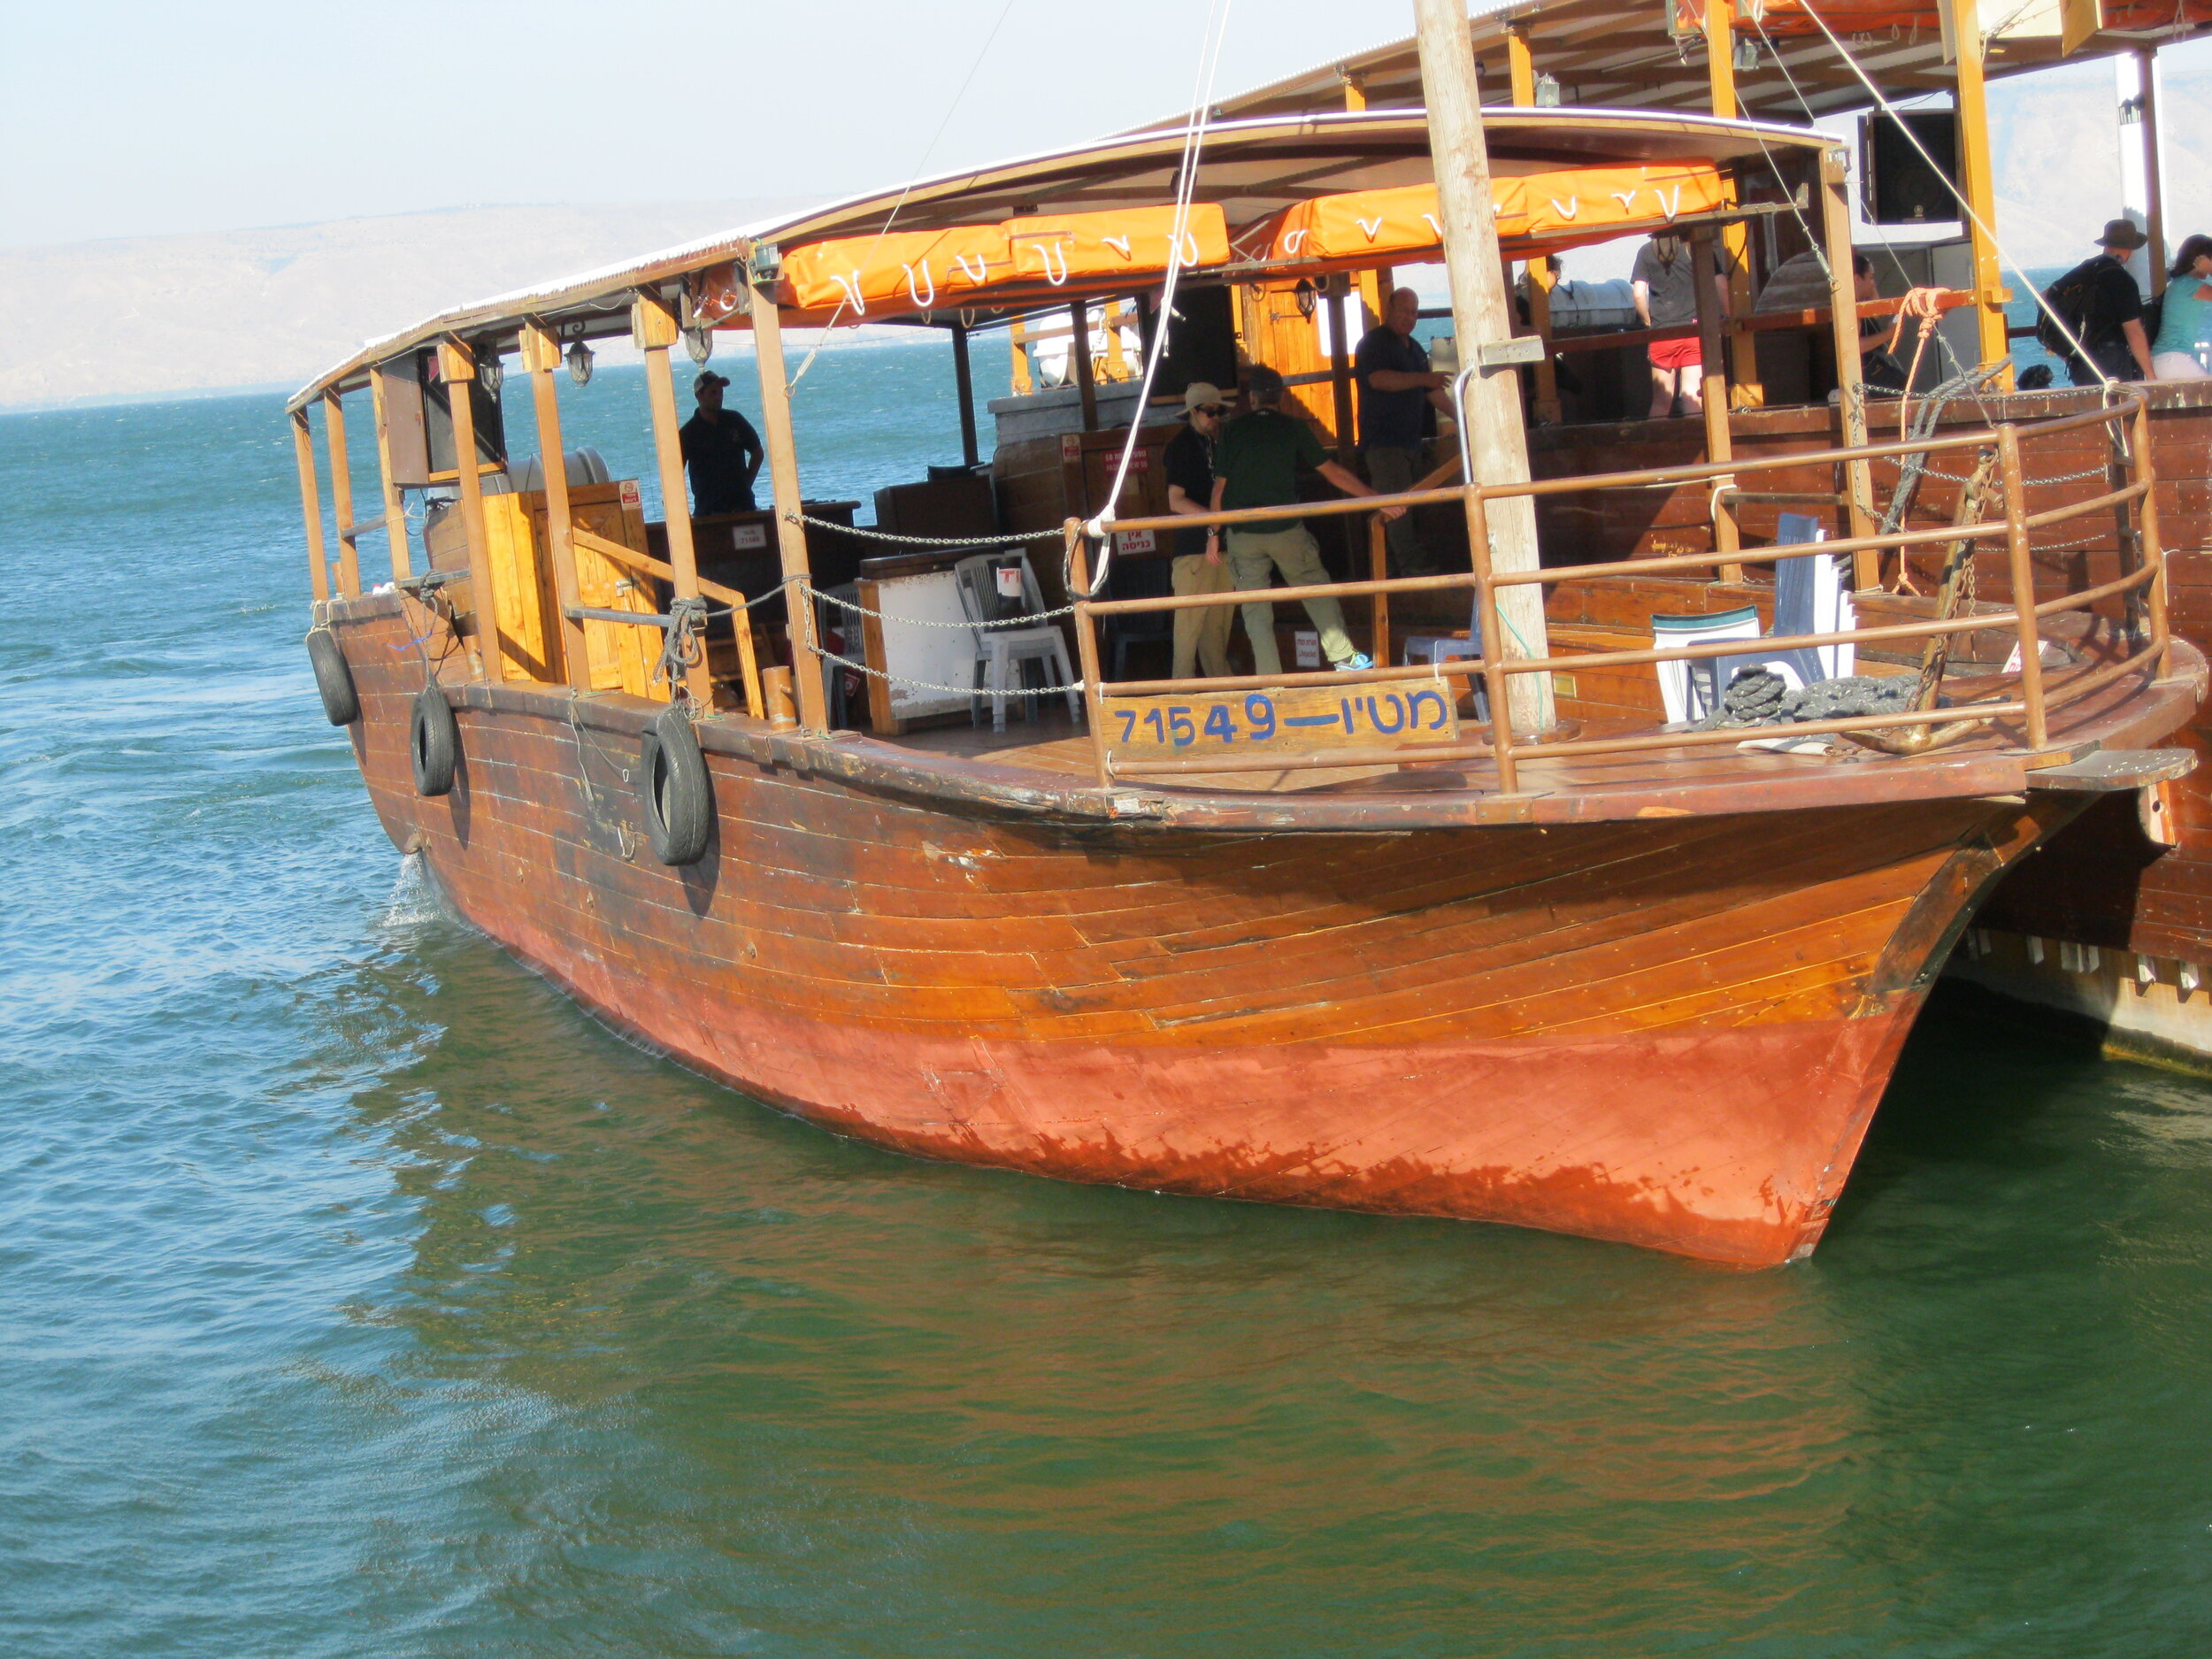  In the Galilee, this boat is referred to as the “Jesus Boat” and takes tourists on a ride on the Sea of Galilee. 